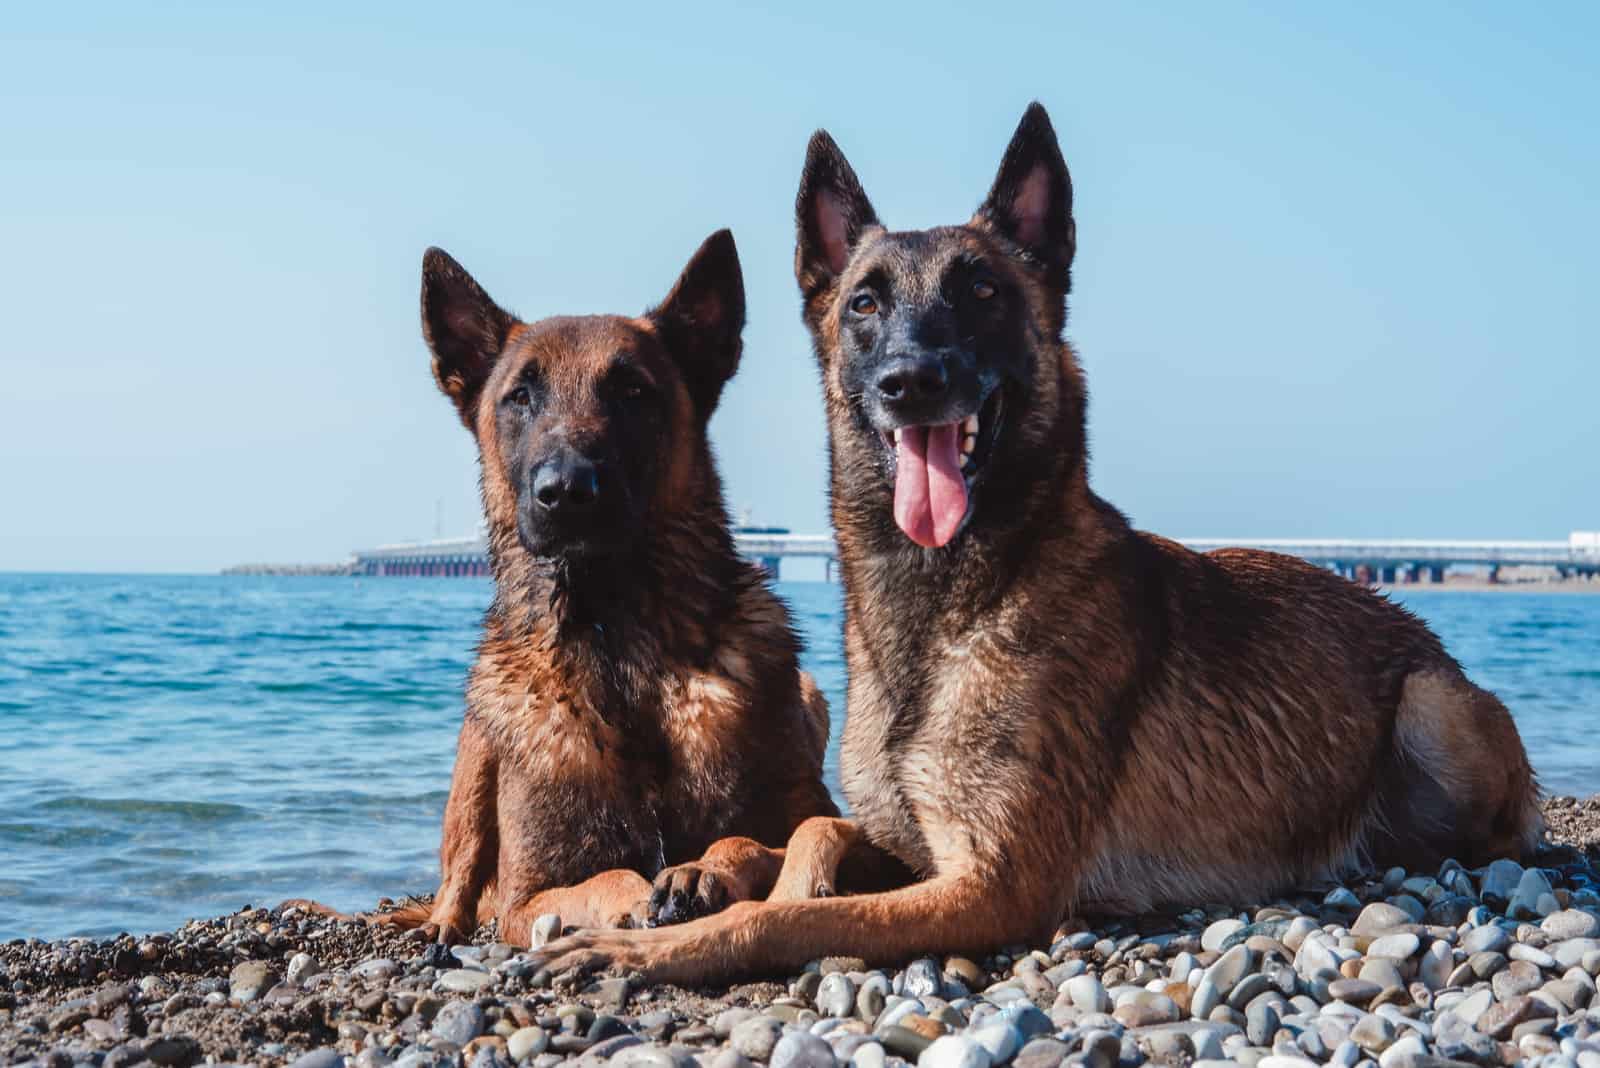 two Malinois on the beach